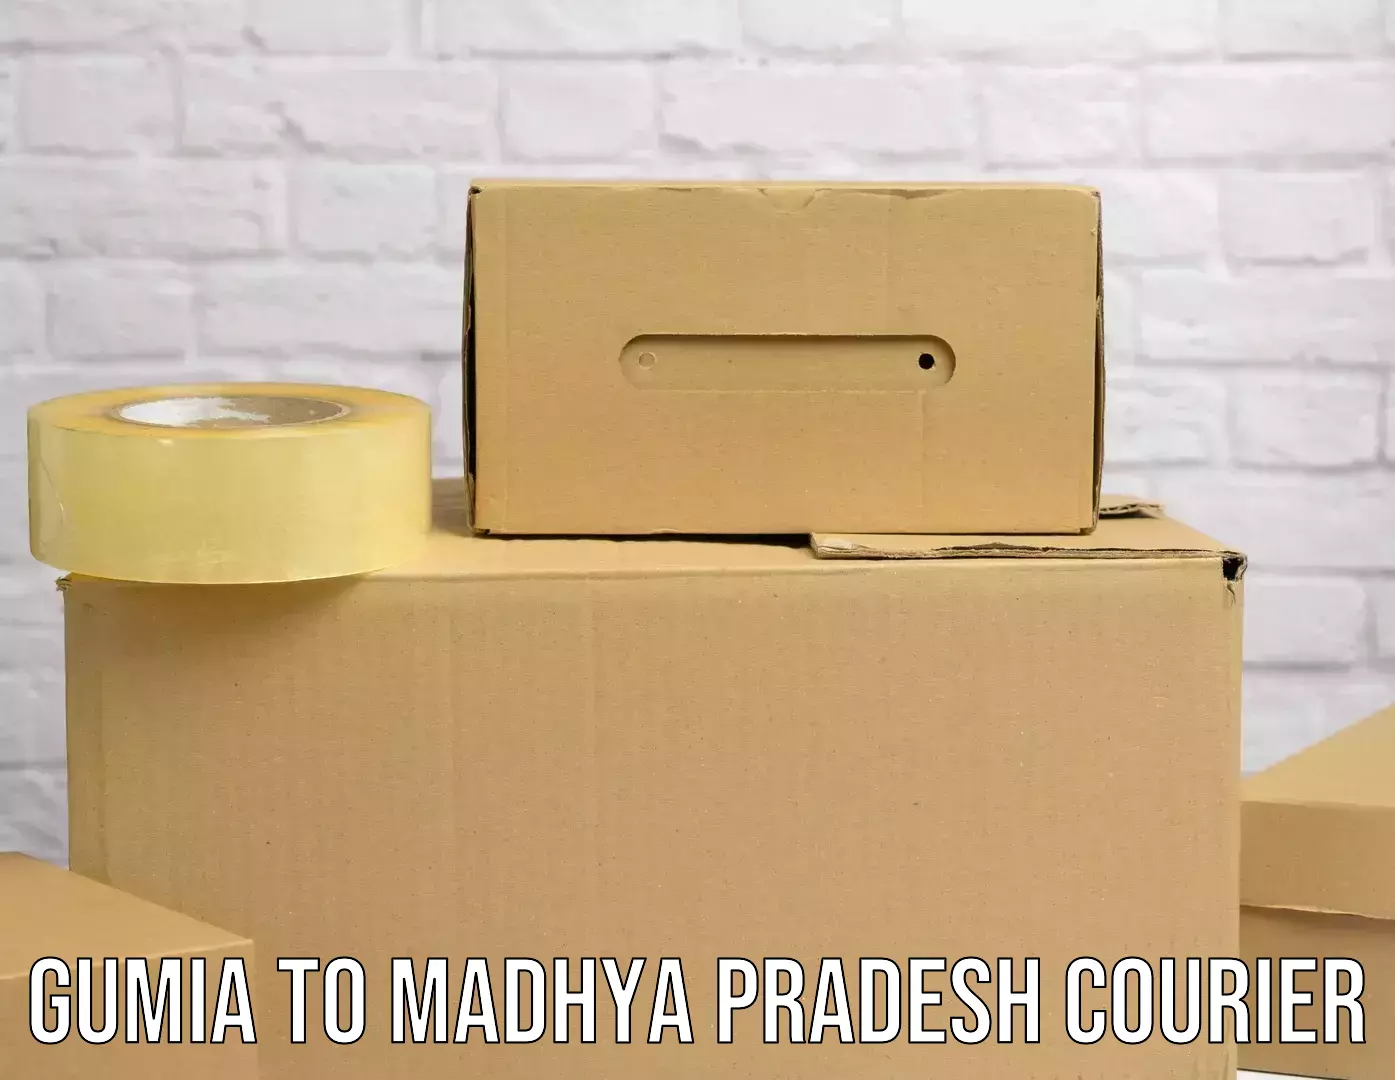 Courier service partnerships Gumia to Athner